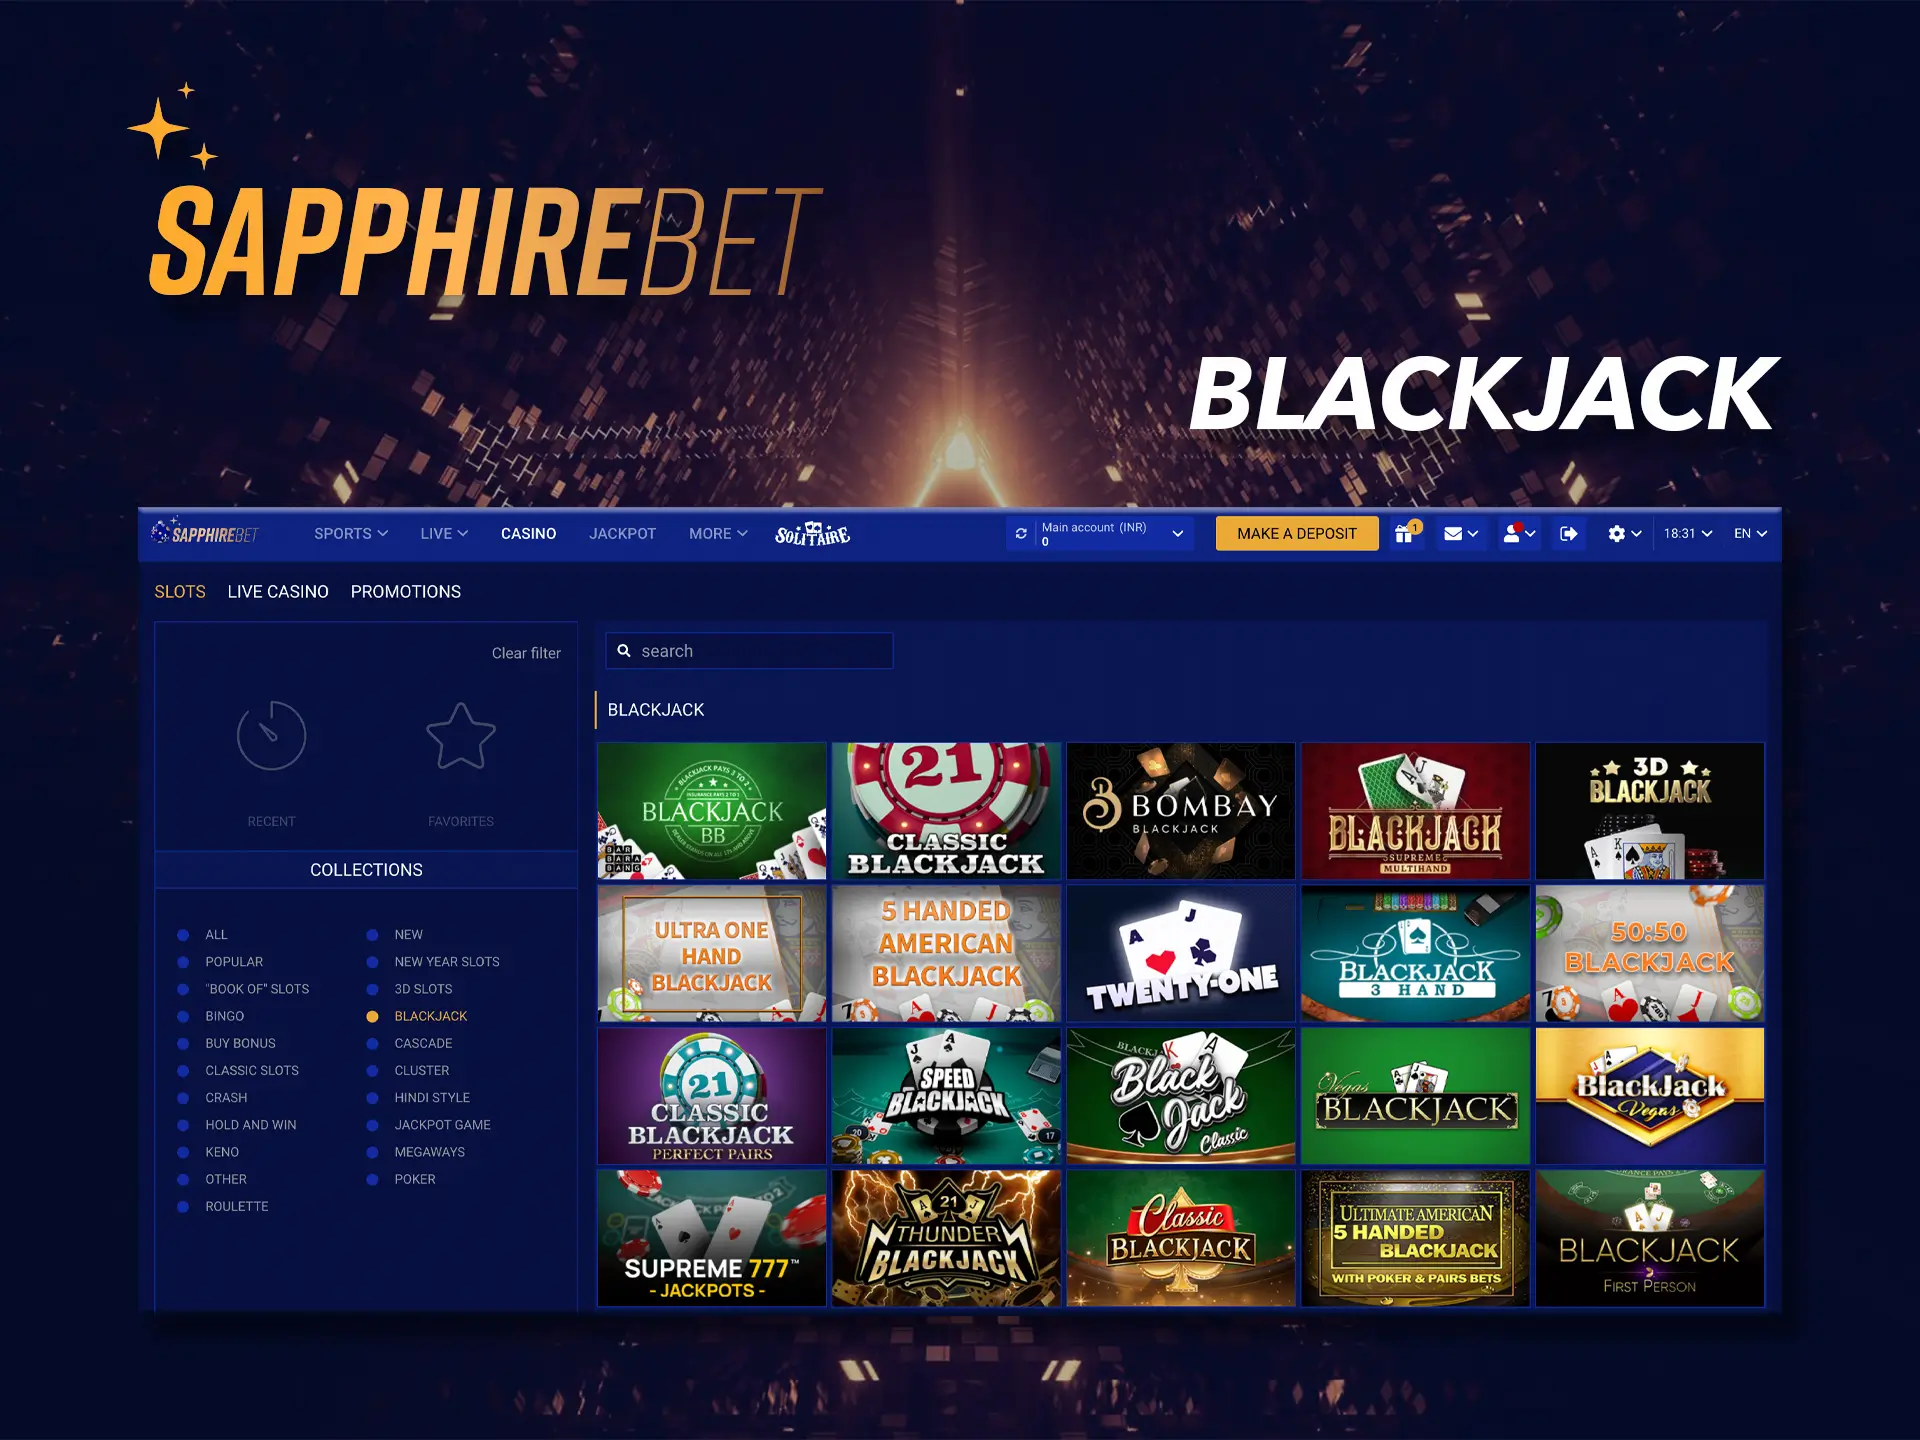 Try your luck at Blackjack from Sapphirebet.